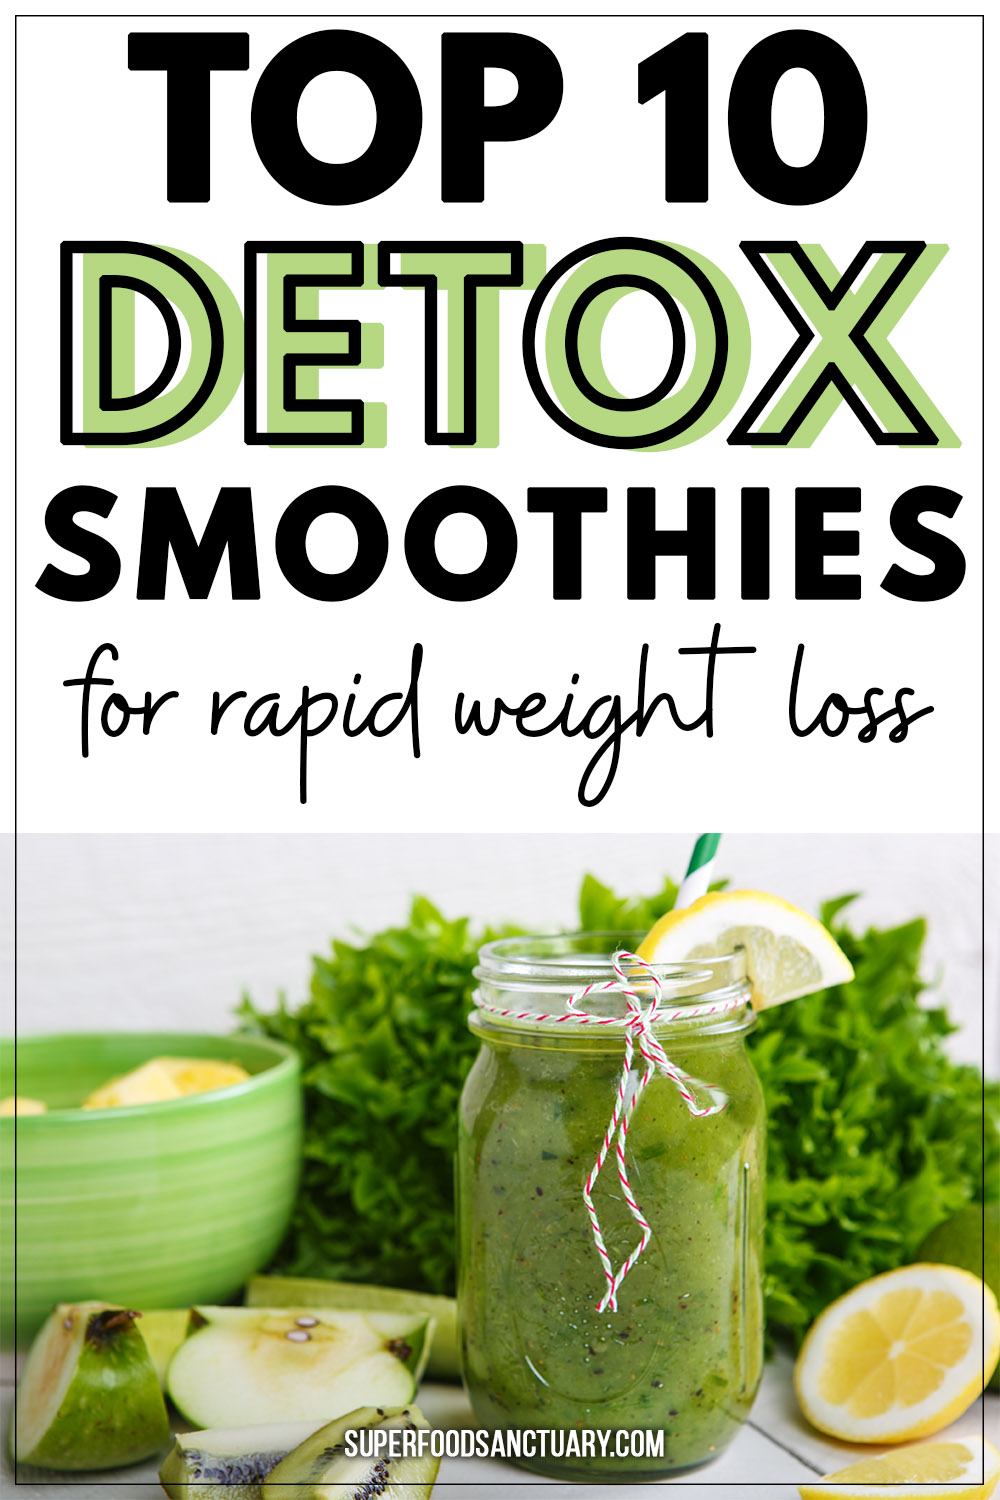 Top 10 Detox Smoothie Recipes For Weight Loss Superfood Sanctuary